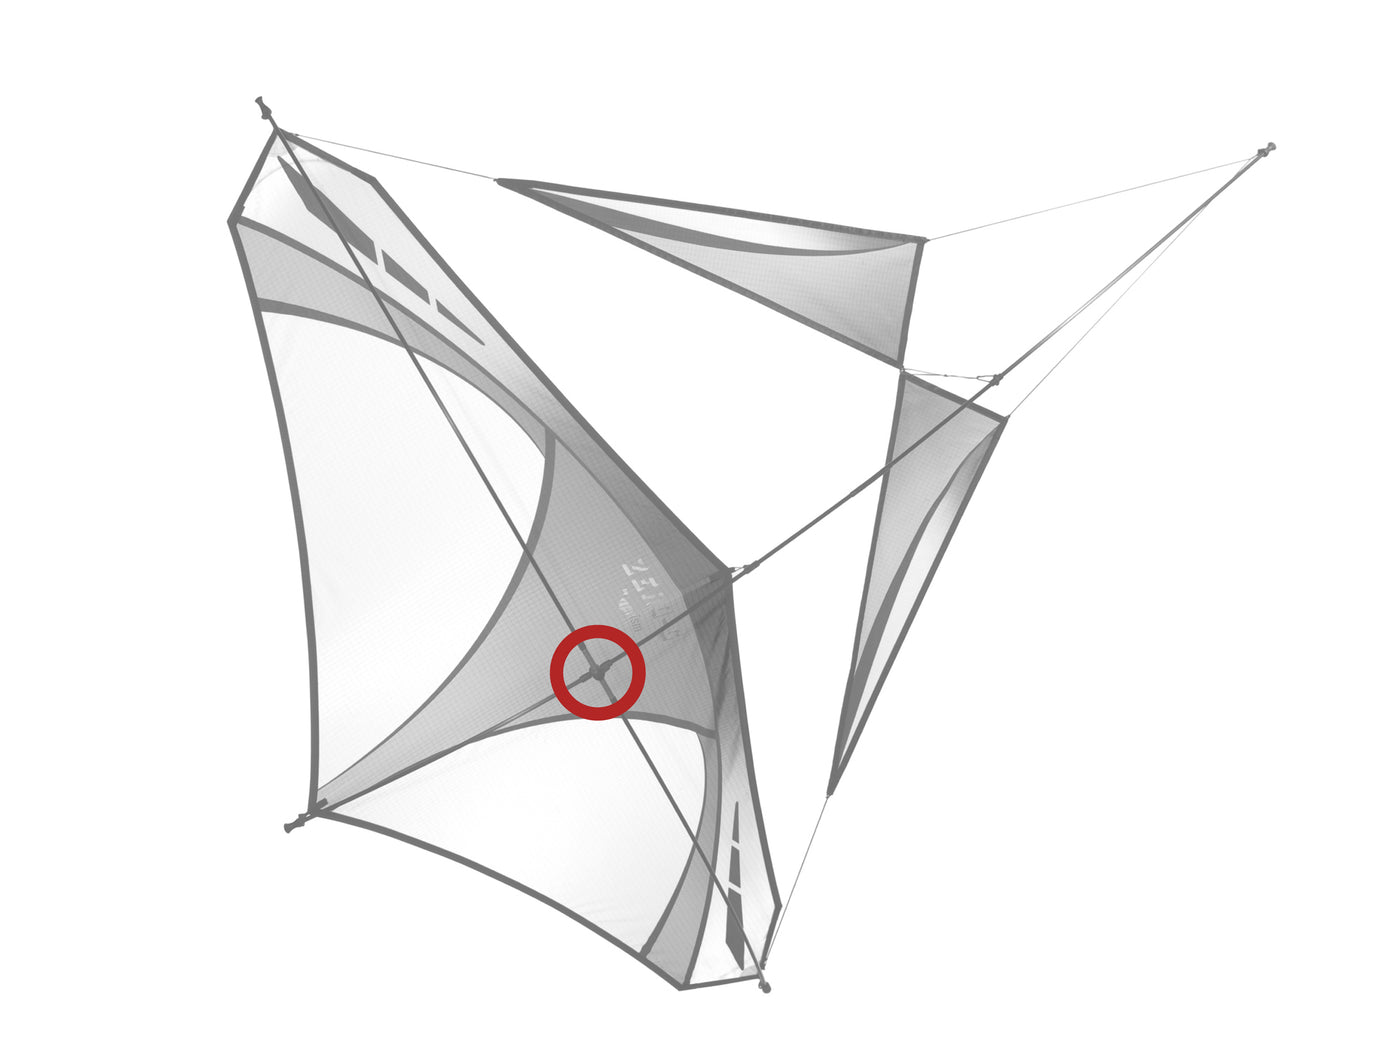 Diagram showing location of the Zero G Center T on the kite.